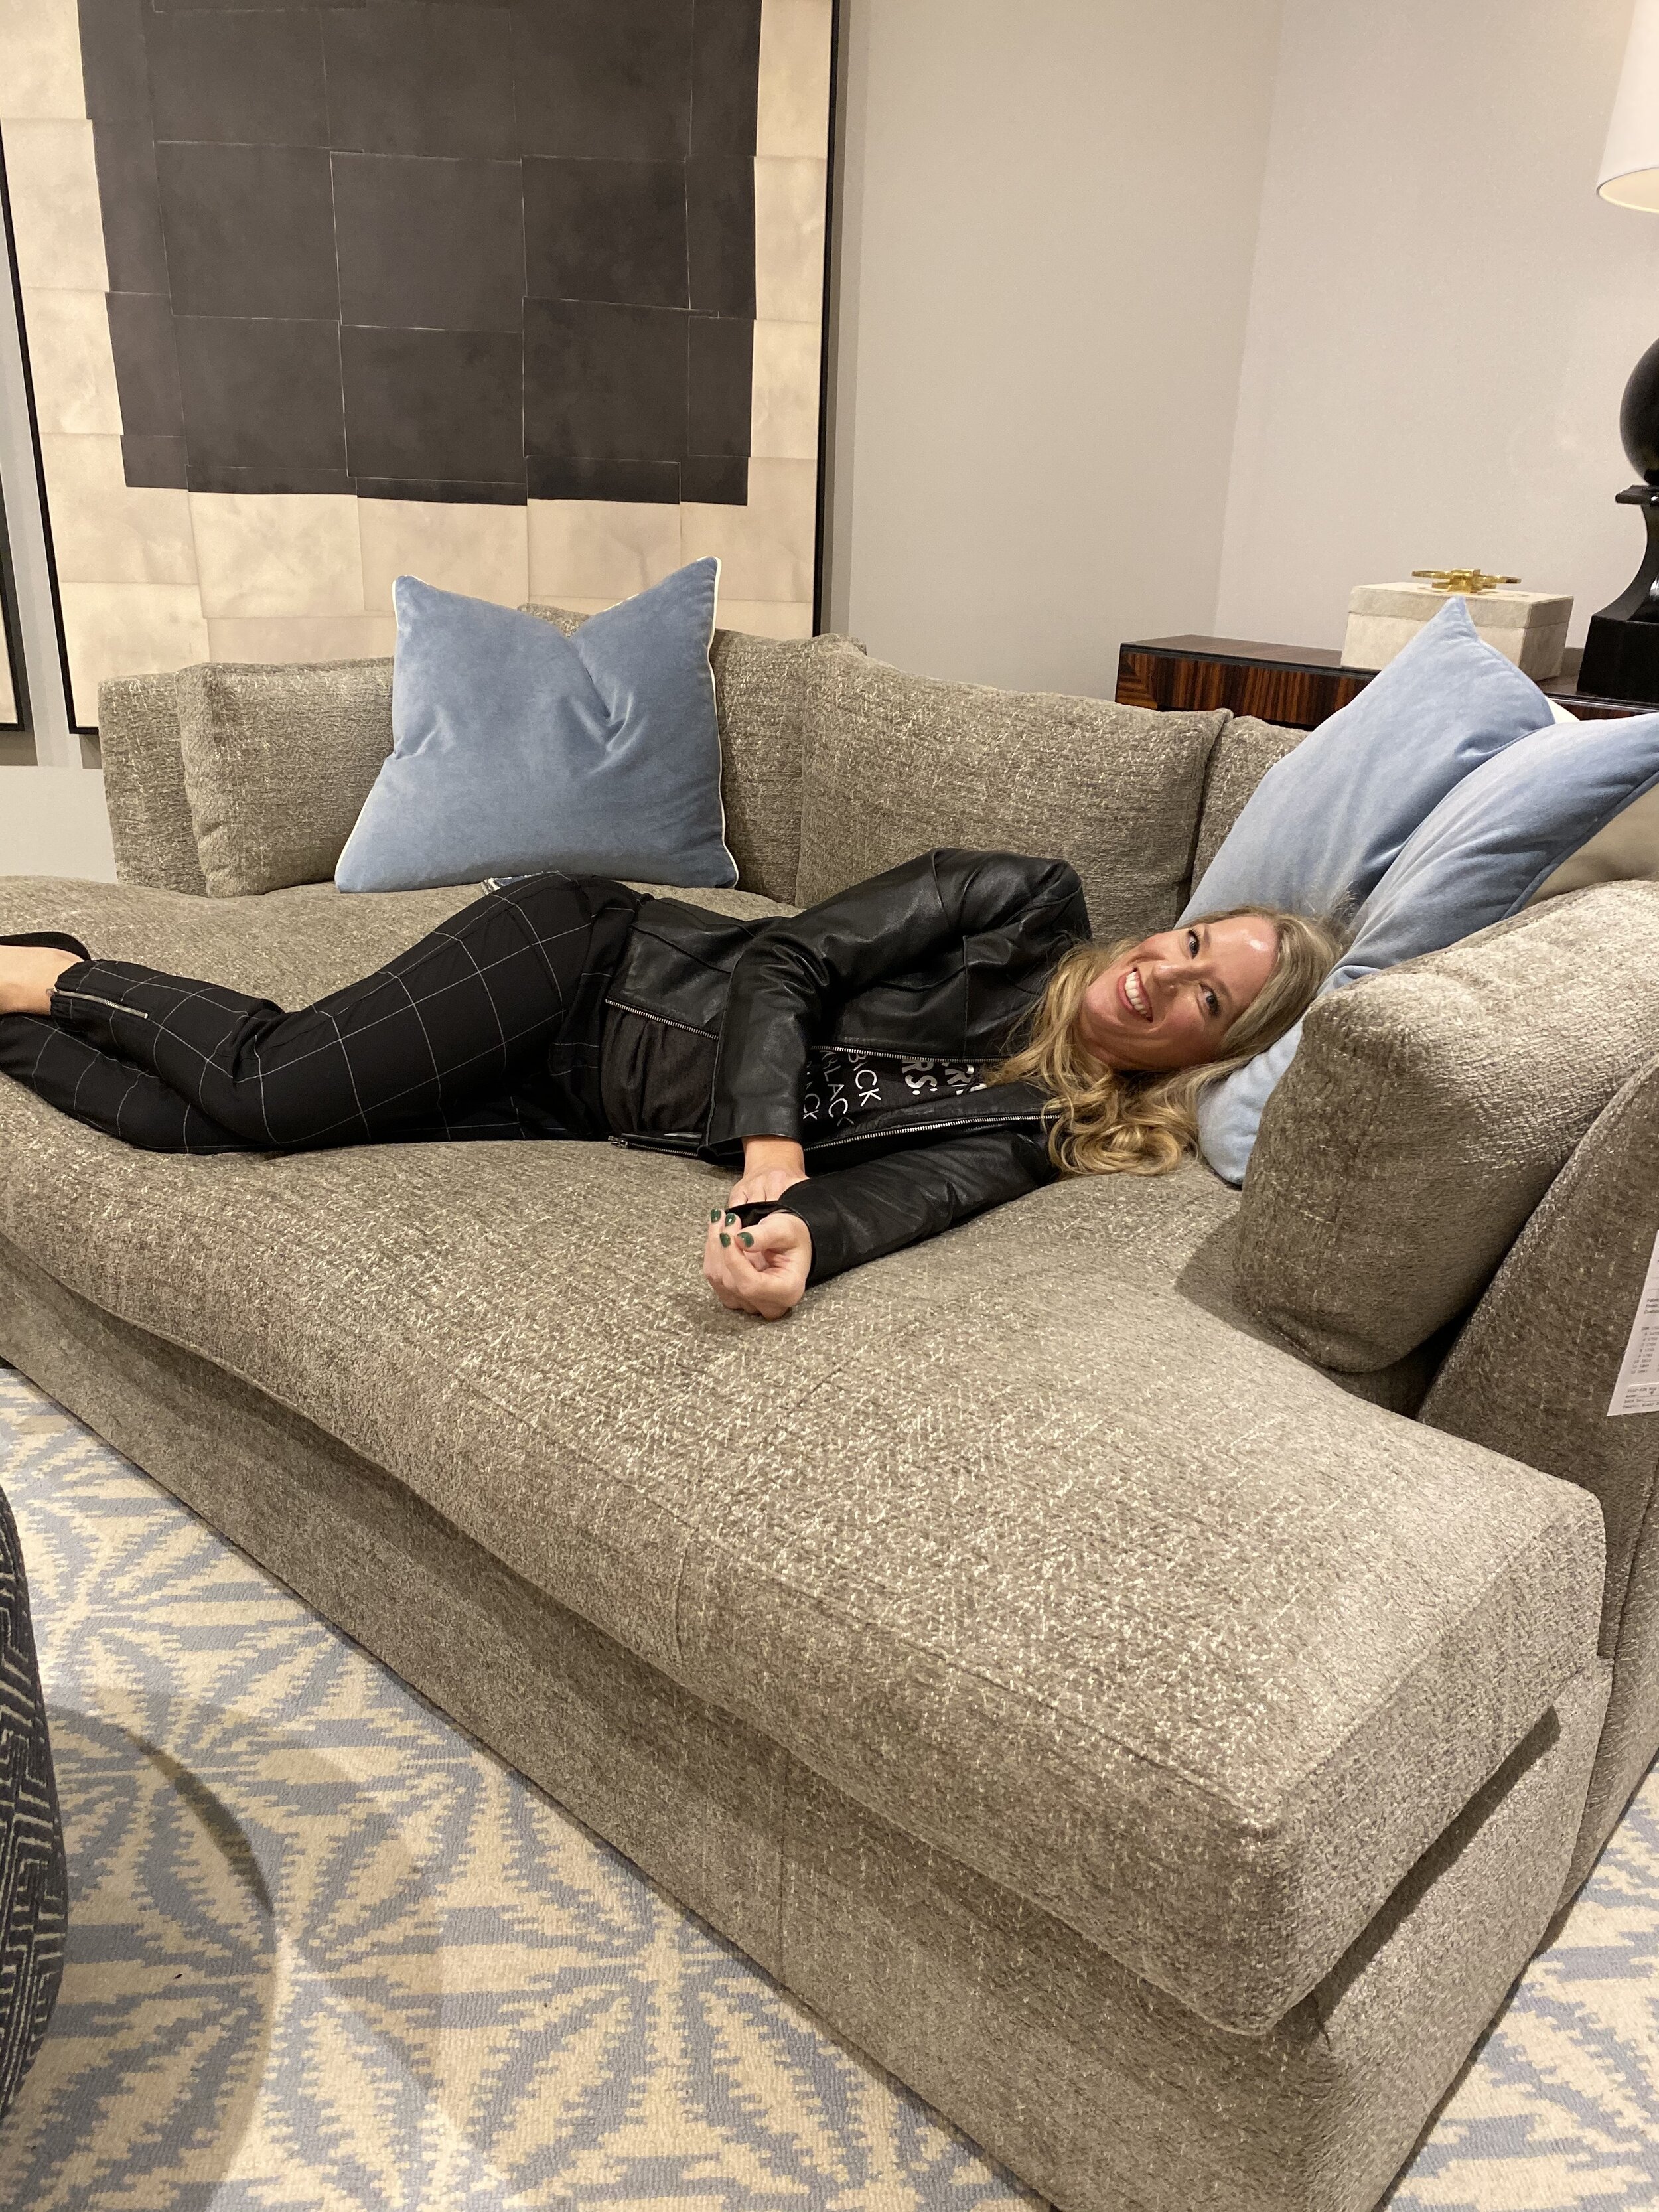 I take my sit-tests or lay down tests very seriously.  Here I was laying down, so you could get a sense of scale and size of this lounging sofa. (This was taken at the Oct. ‘19 market)